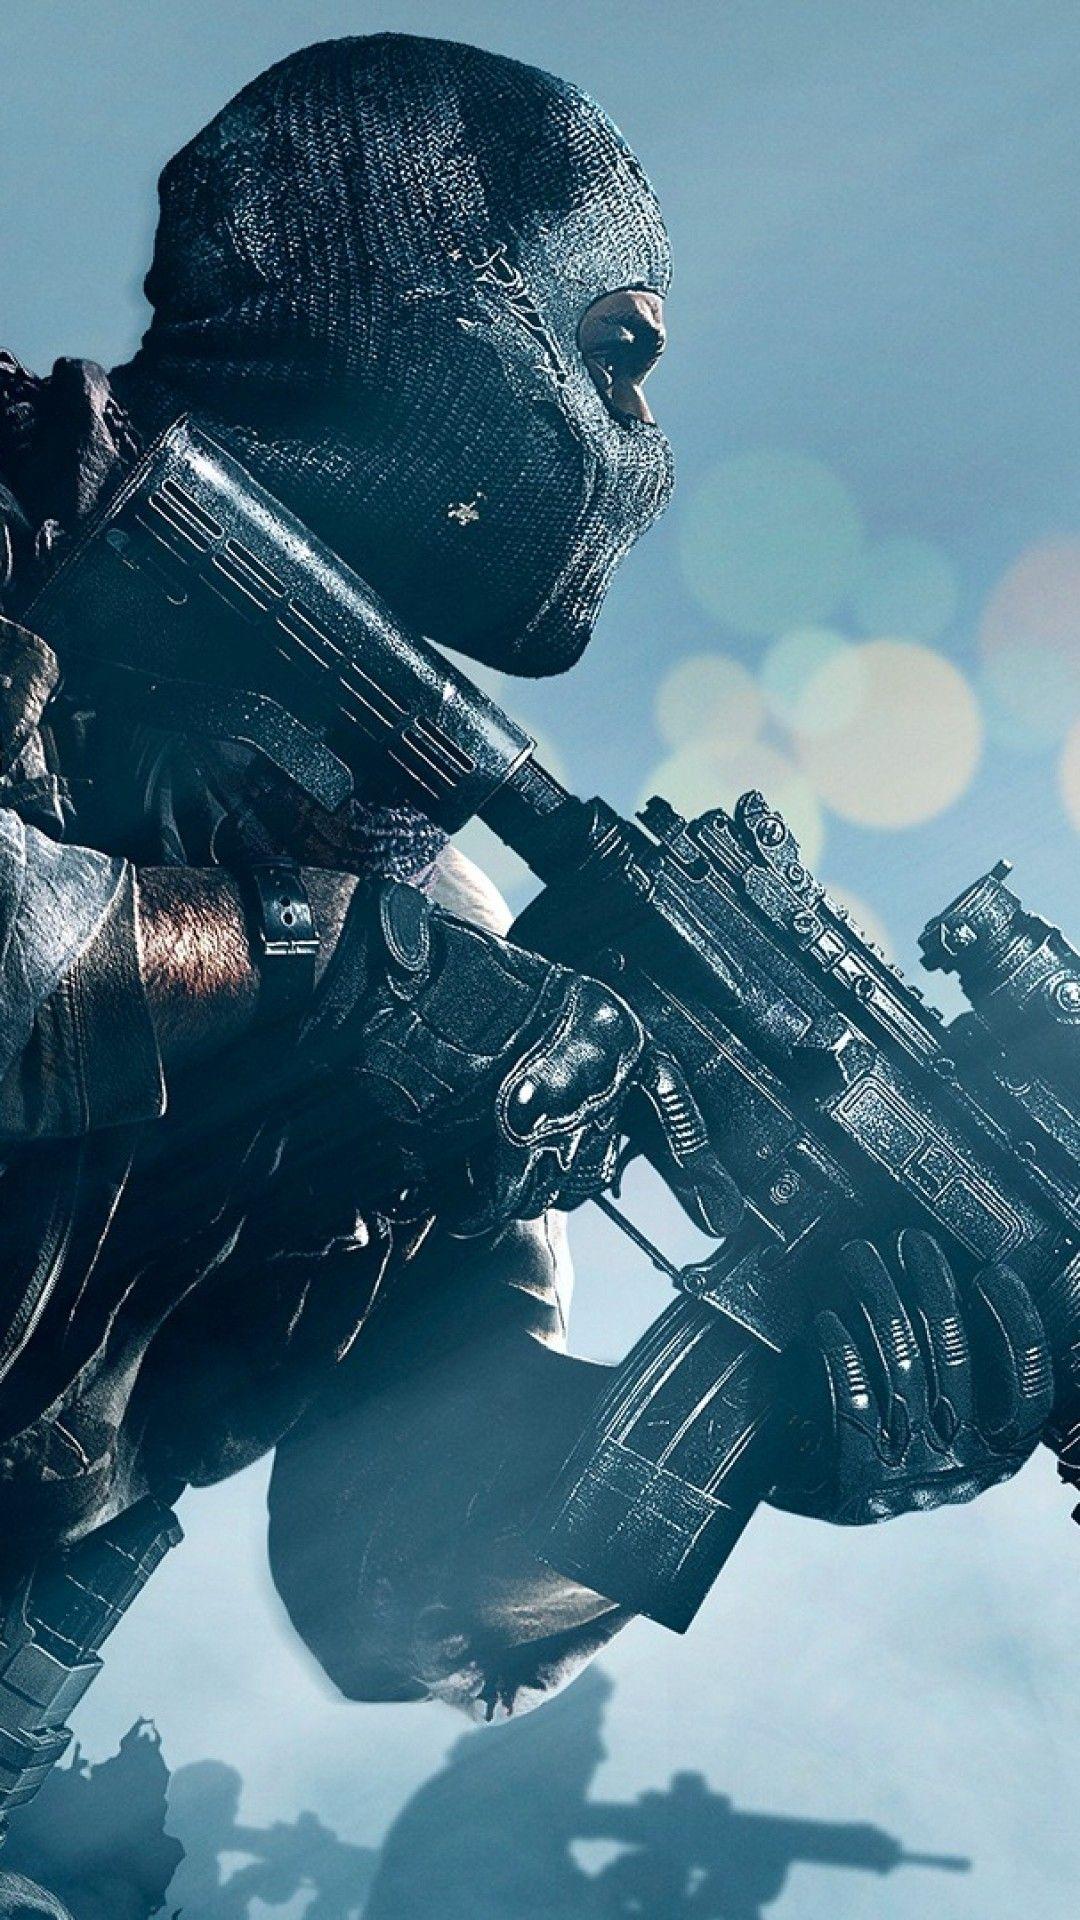 20 Call of Duty Mobile HD Wallpapers and Backgrounds